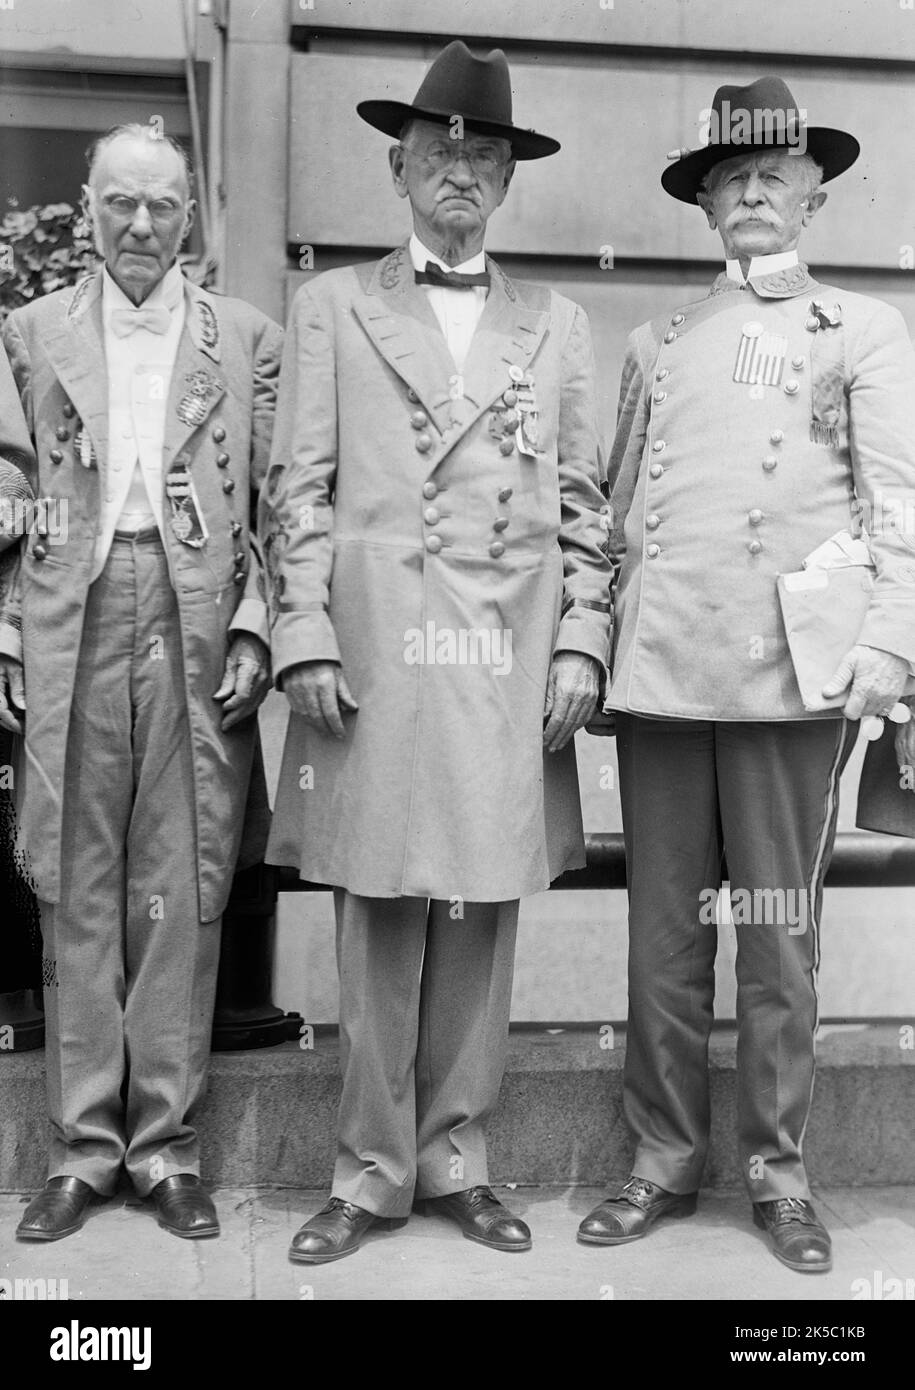 Confederate Reunion - Gen. Harrison of Mississippi, Commander In Chief, with Generals Mickey And Dinkins, 1917. Veterans from the southern USA in confederate uniform, Washington D.C. Stock Photo